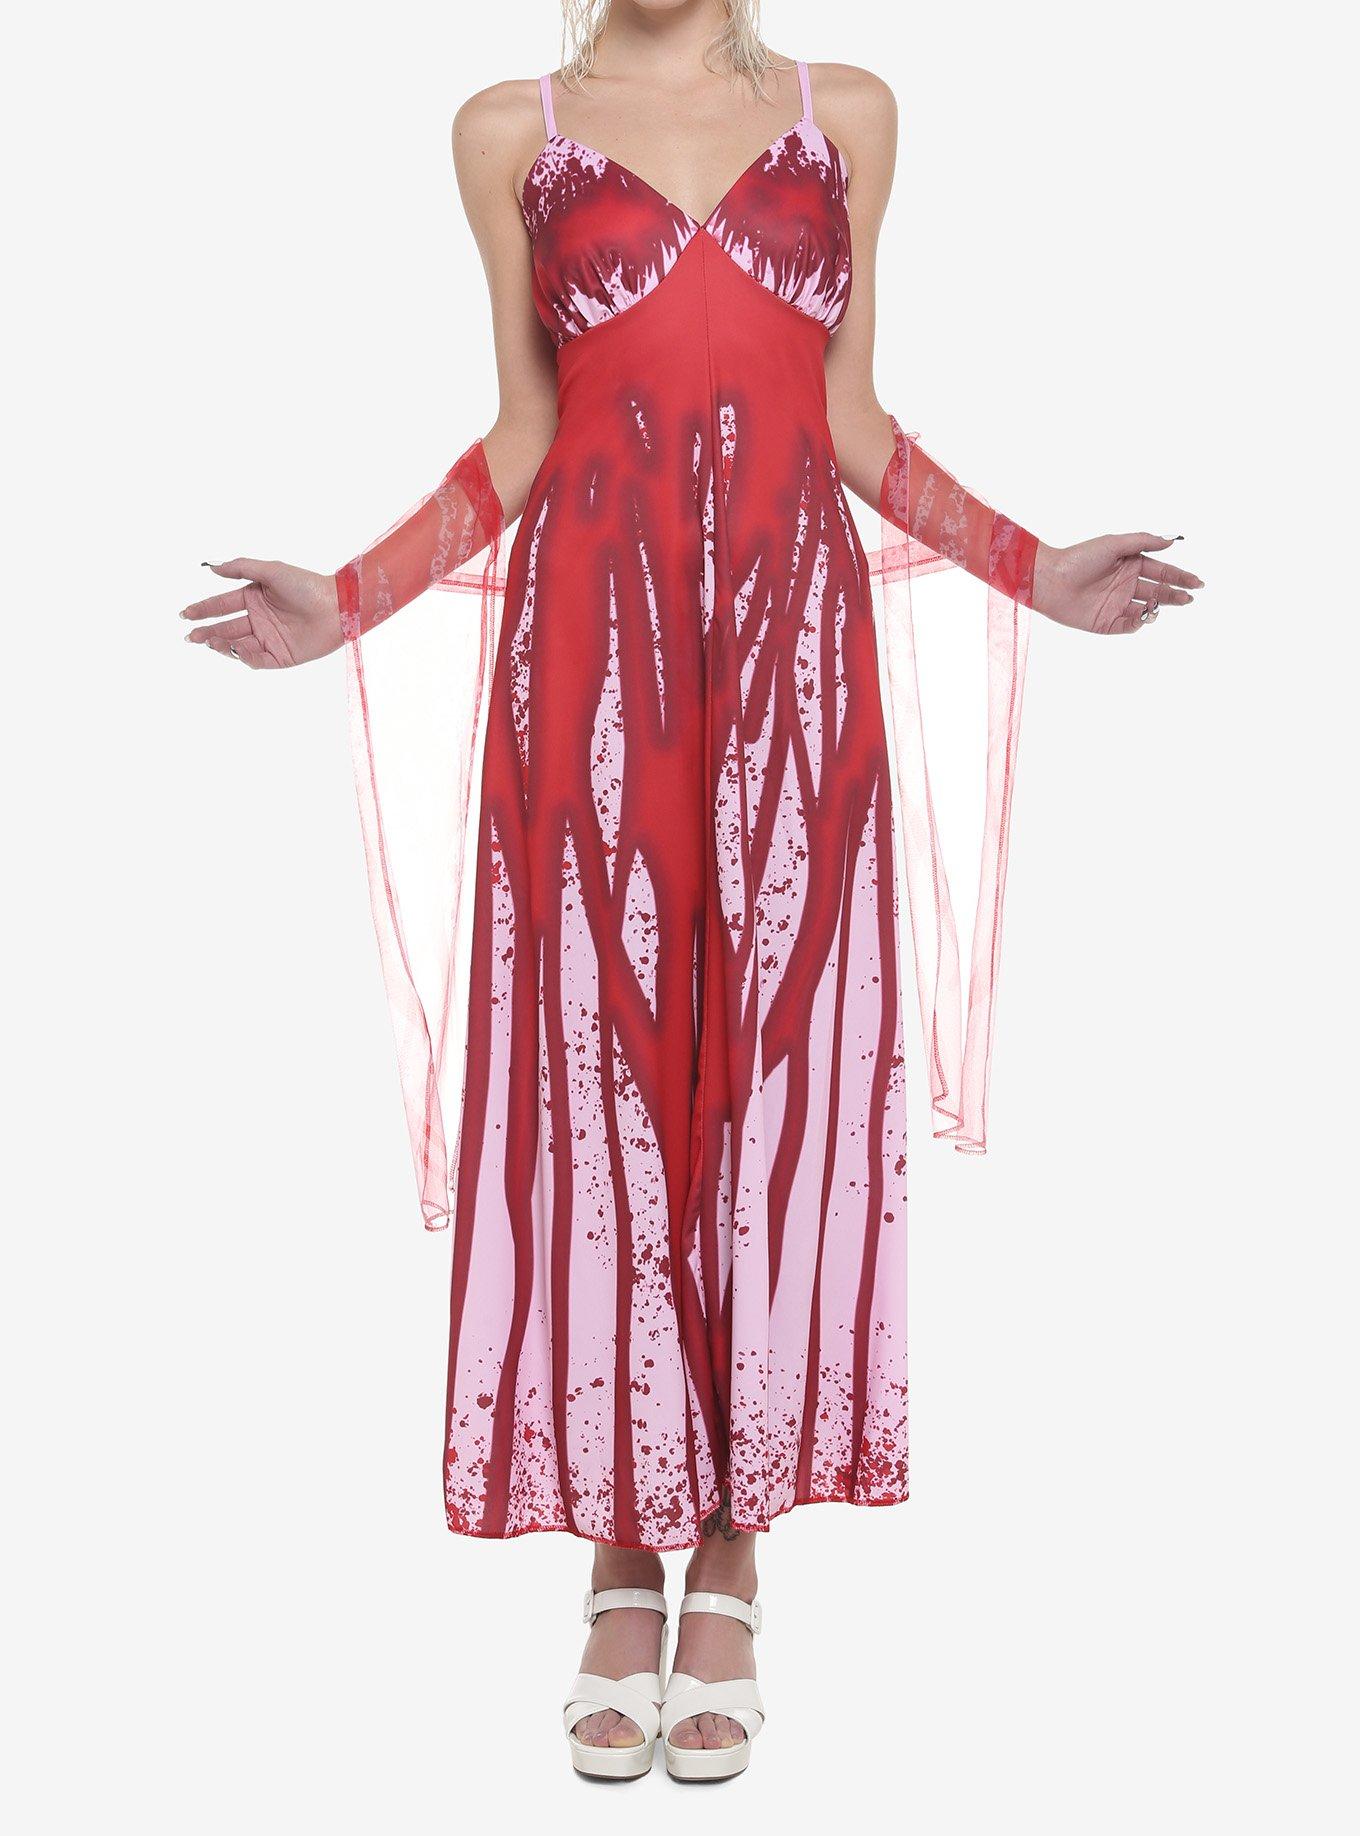 Carrie Bloody Dress Costume, MULTI, hi-res